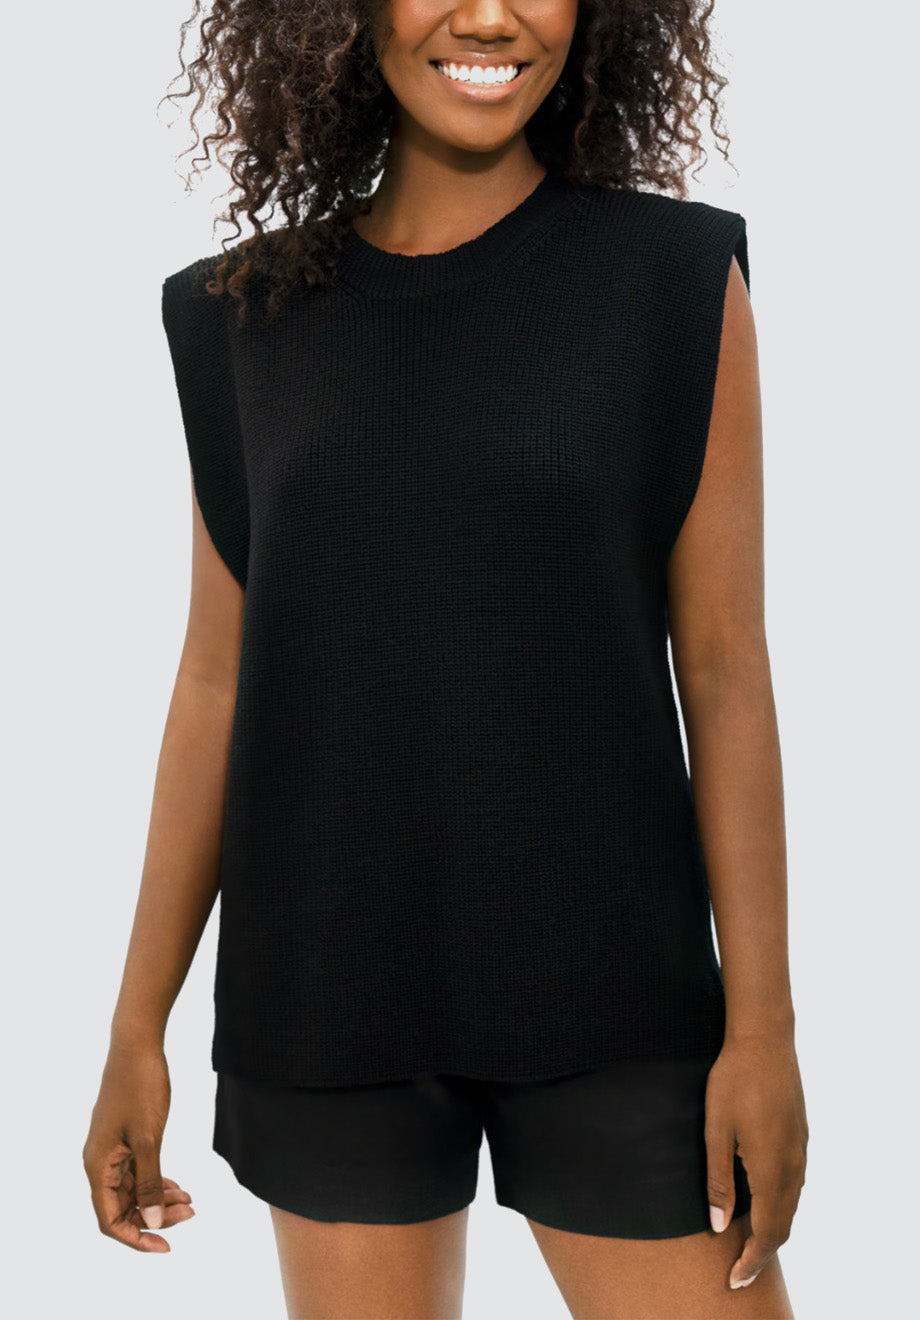 Napoli NAP - High-Neck Knitted Top | Licorice